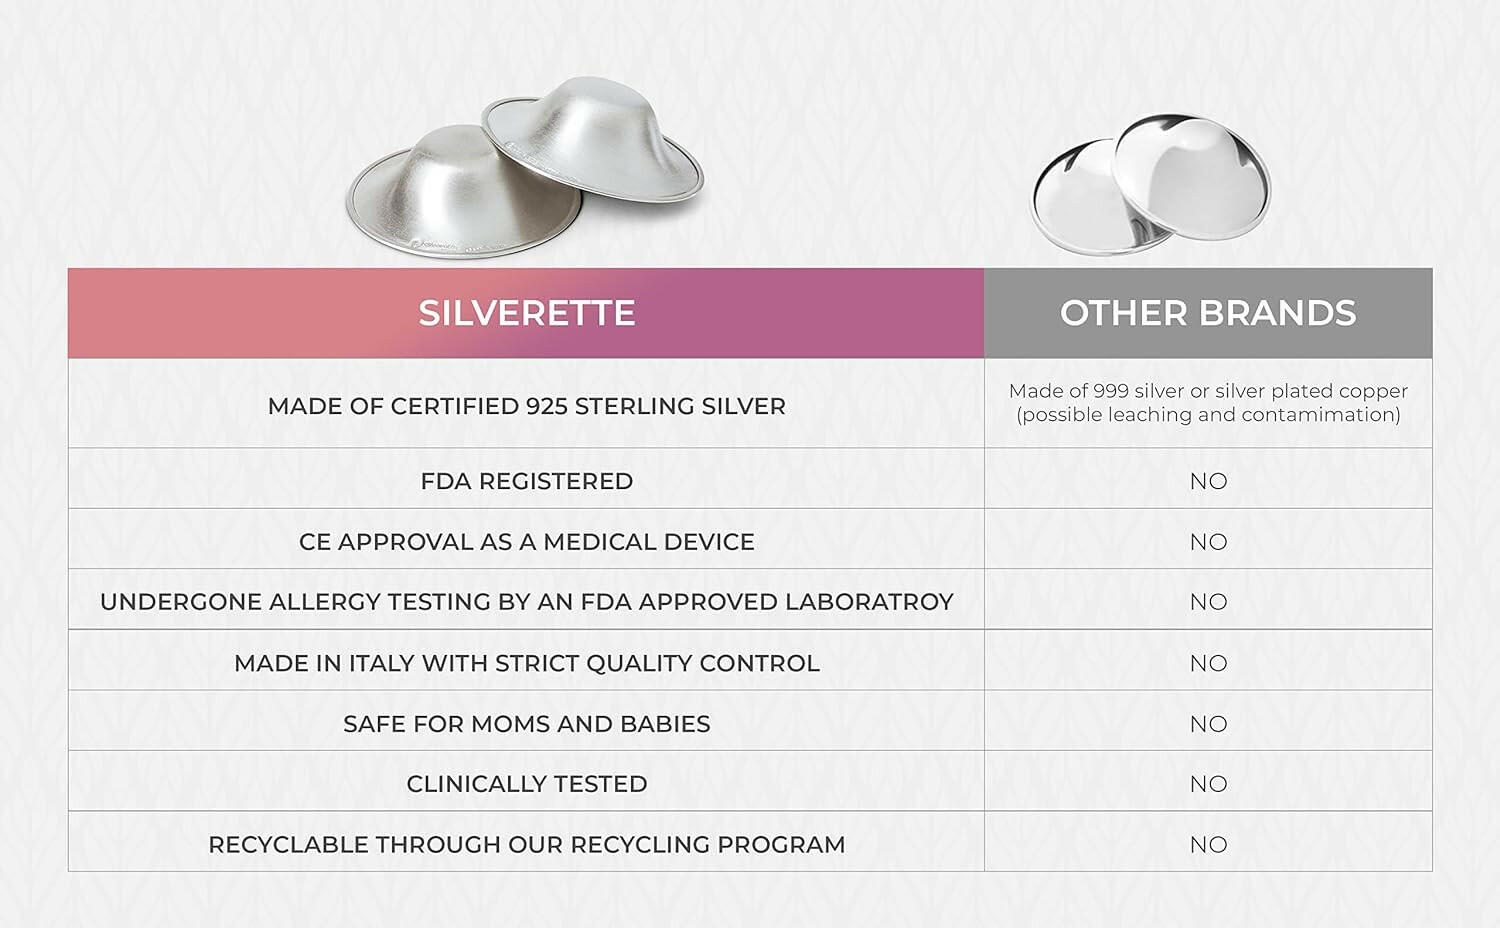 SILVERETTE The Original Silver Nursing Cups - Soothe and Protect Your Nursing Nipples